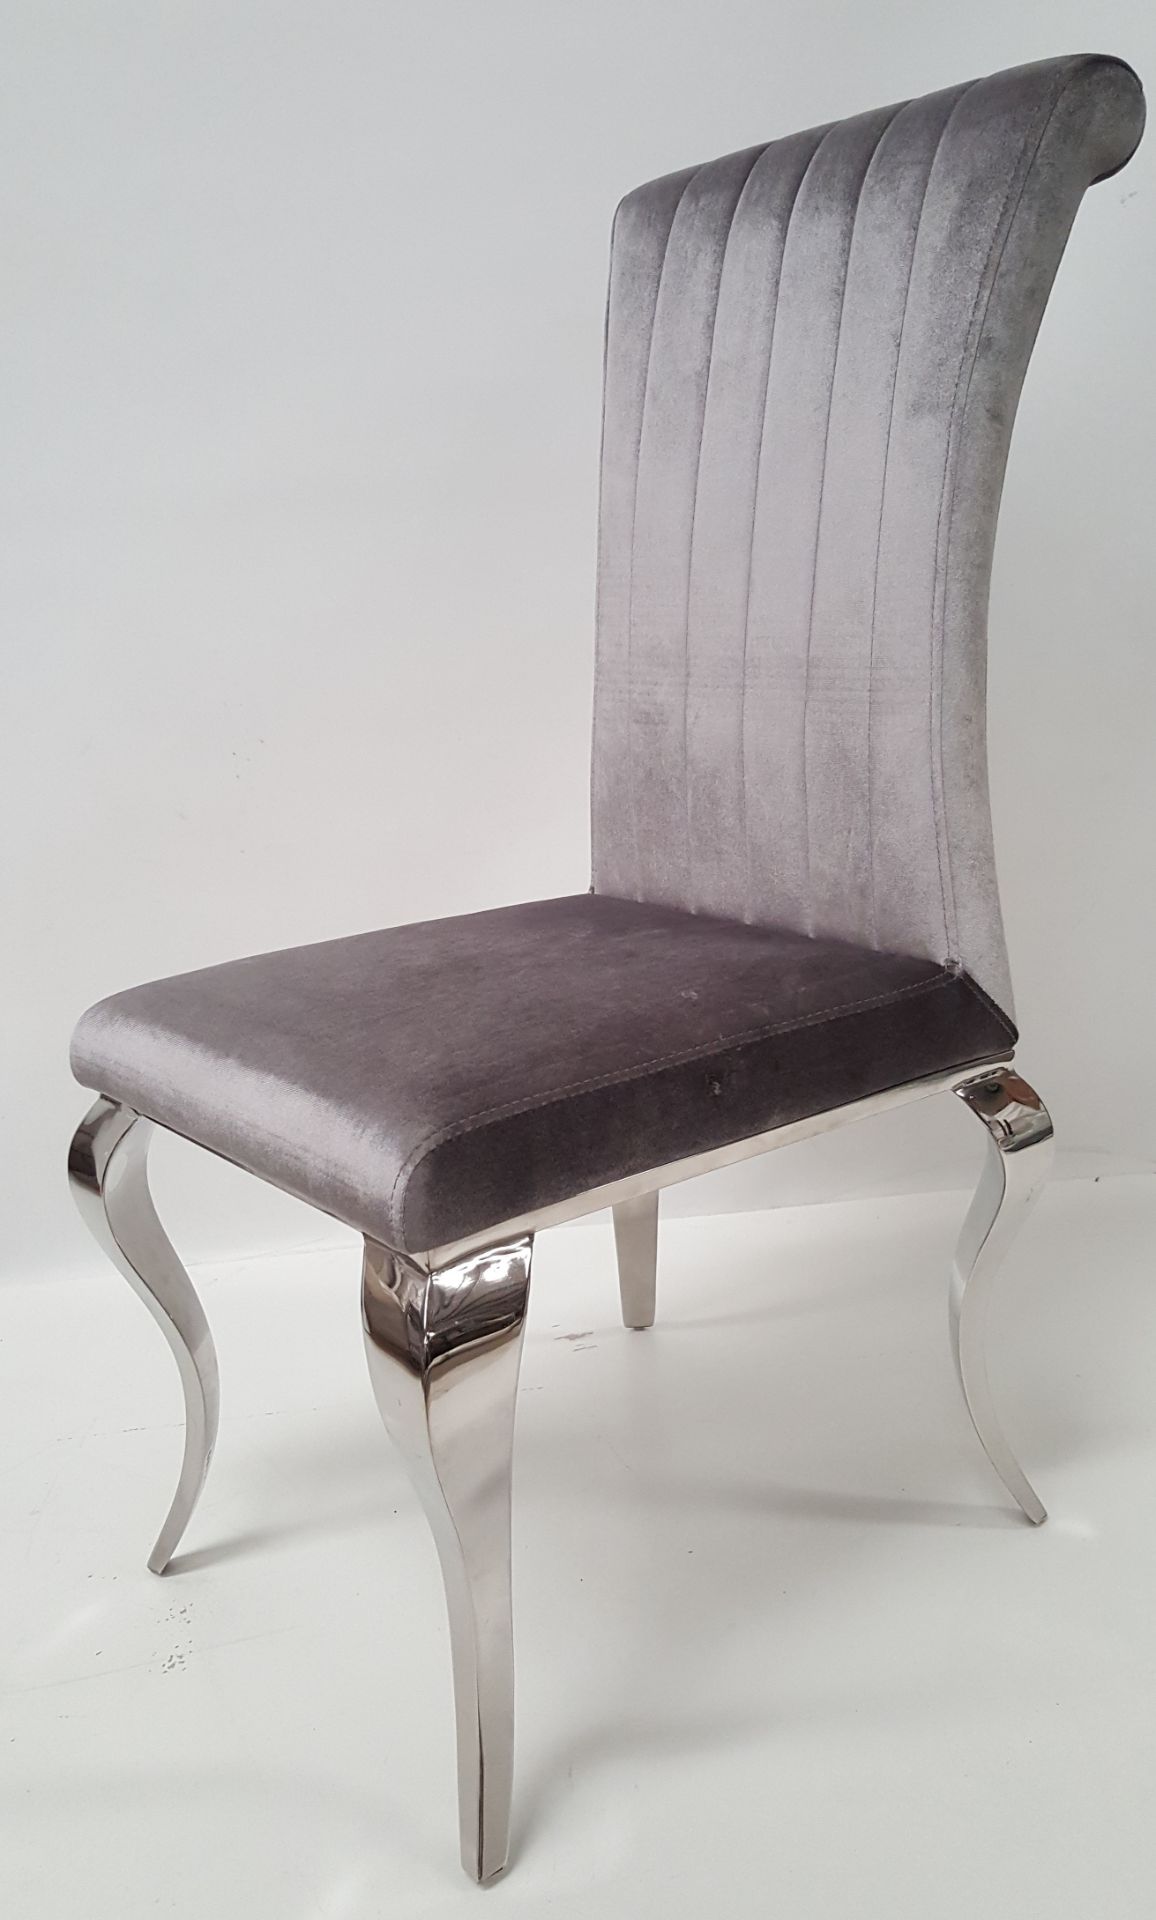 4 x STYLISH SILVER PLUSH VELOUR DRESSING/DINING TABLE CHAIRS - CL408 - Location: Altrincham WA14 - Image 5 of 7